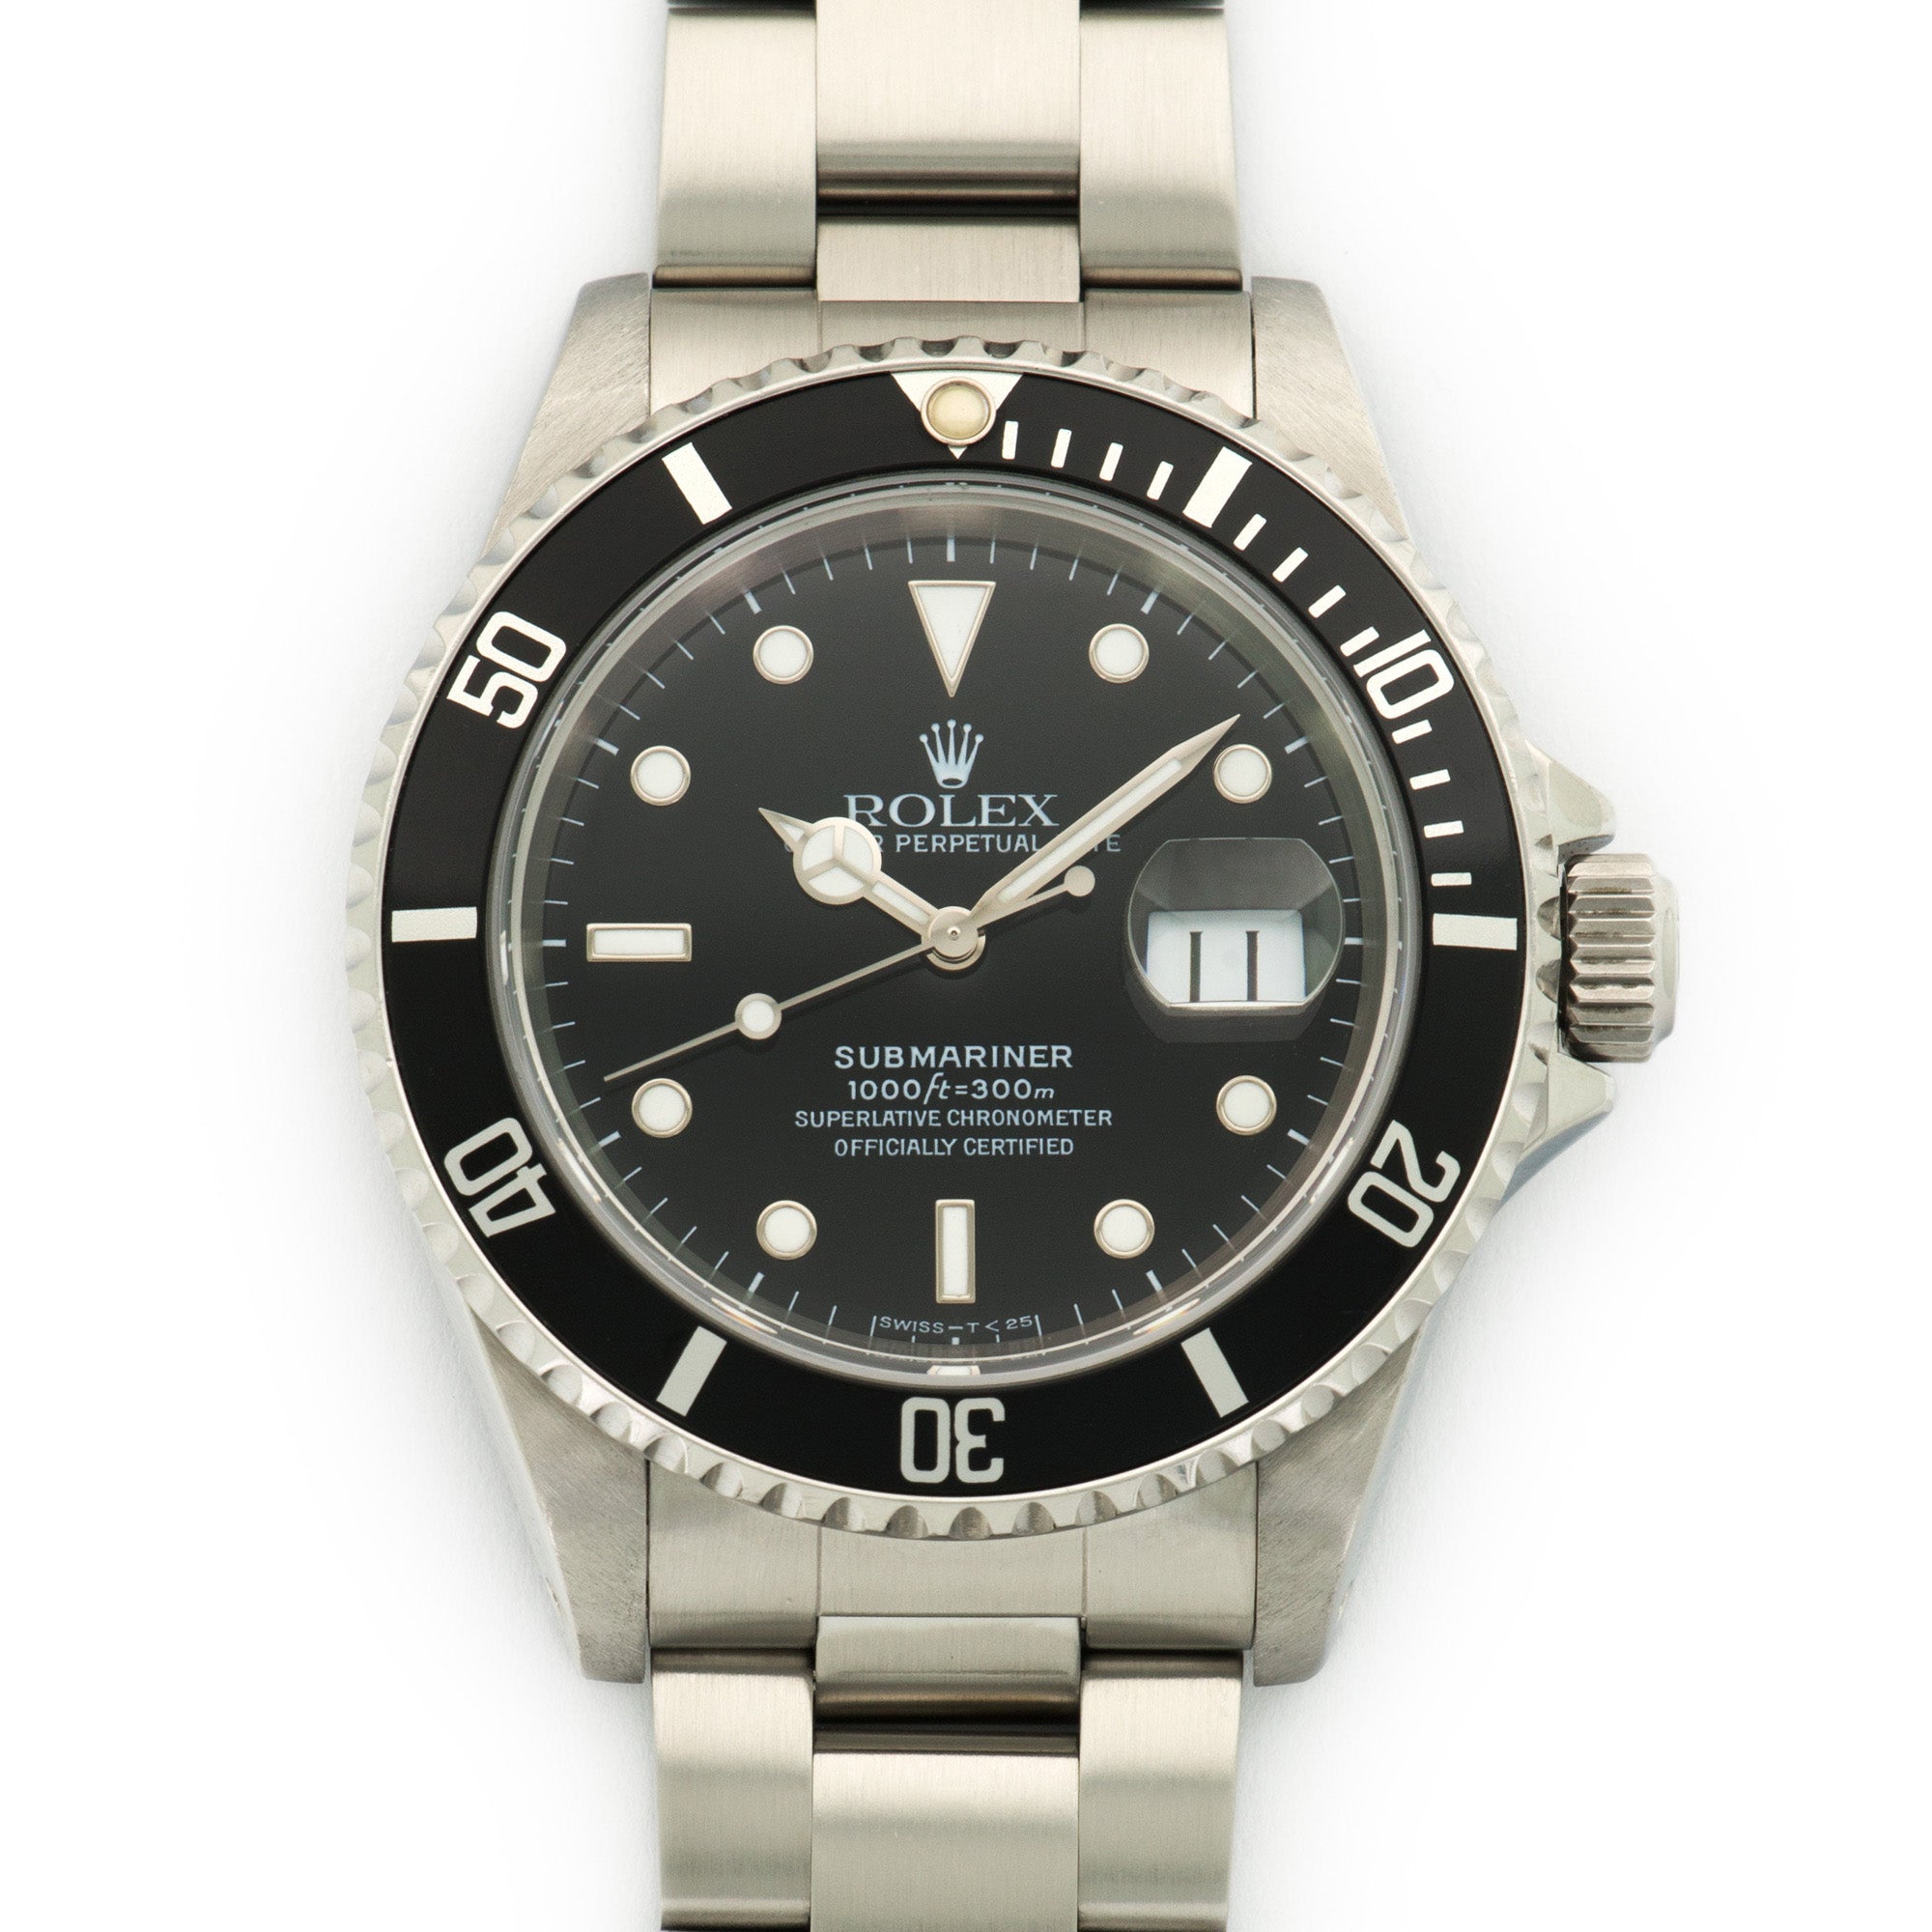 Rolex - Rolex Stainless Steel Submariner Ref. 16610 with Papers - The Keystone Watches